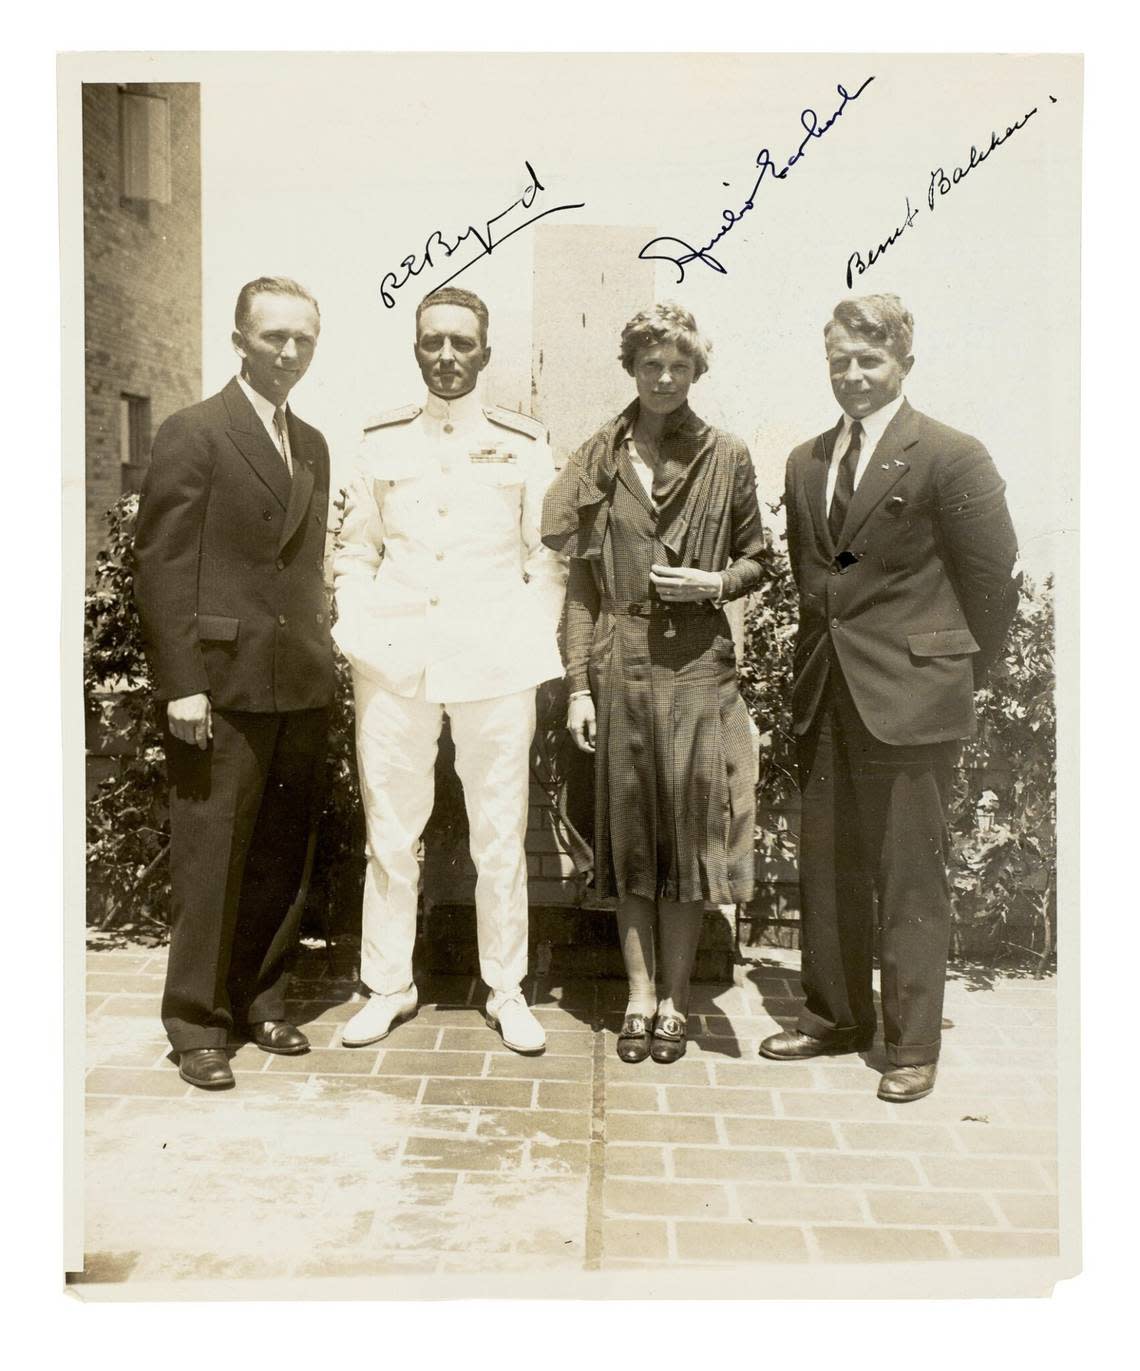 A photo of Amelia Earhart with explorers R.E. Byrd, second from left, and Bernt Balchen, far right, will be auctioned along with other Earhart photos. Courtesy Bonhams